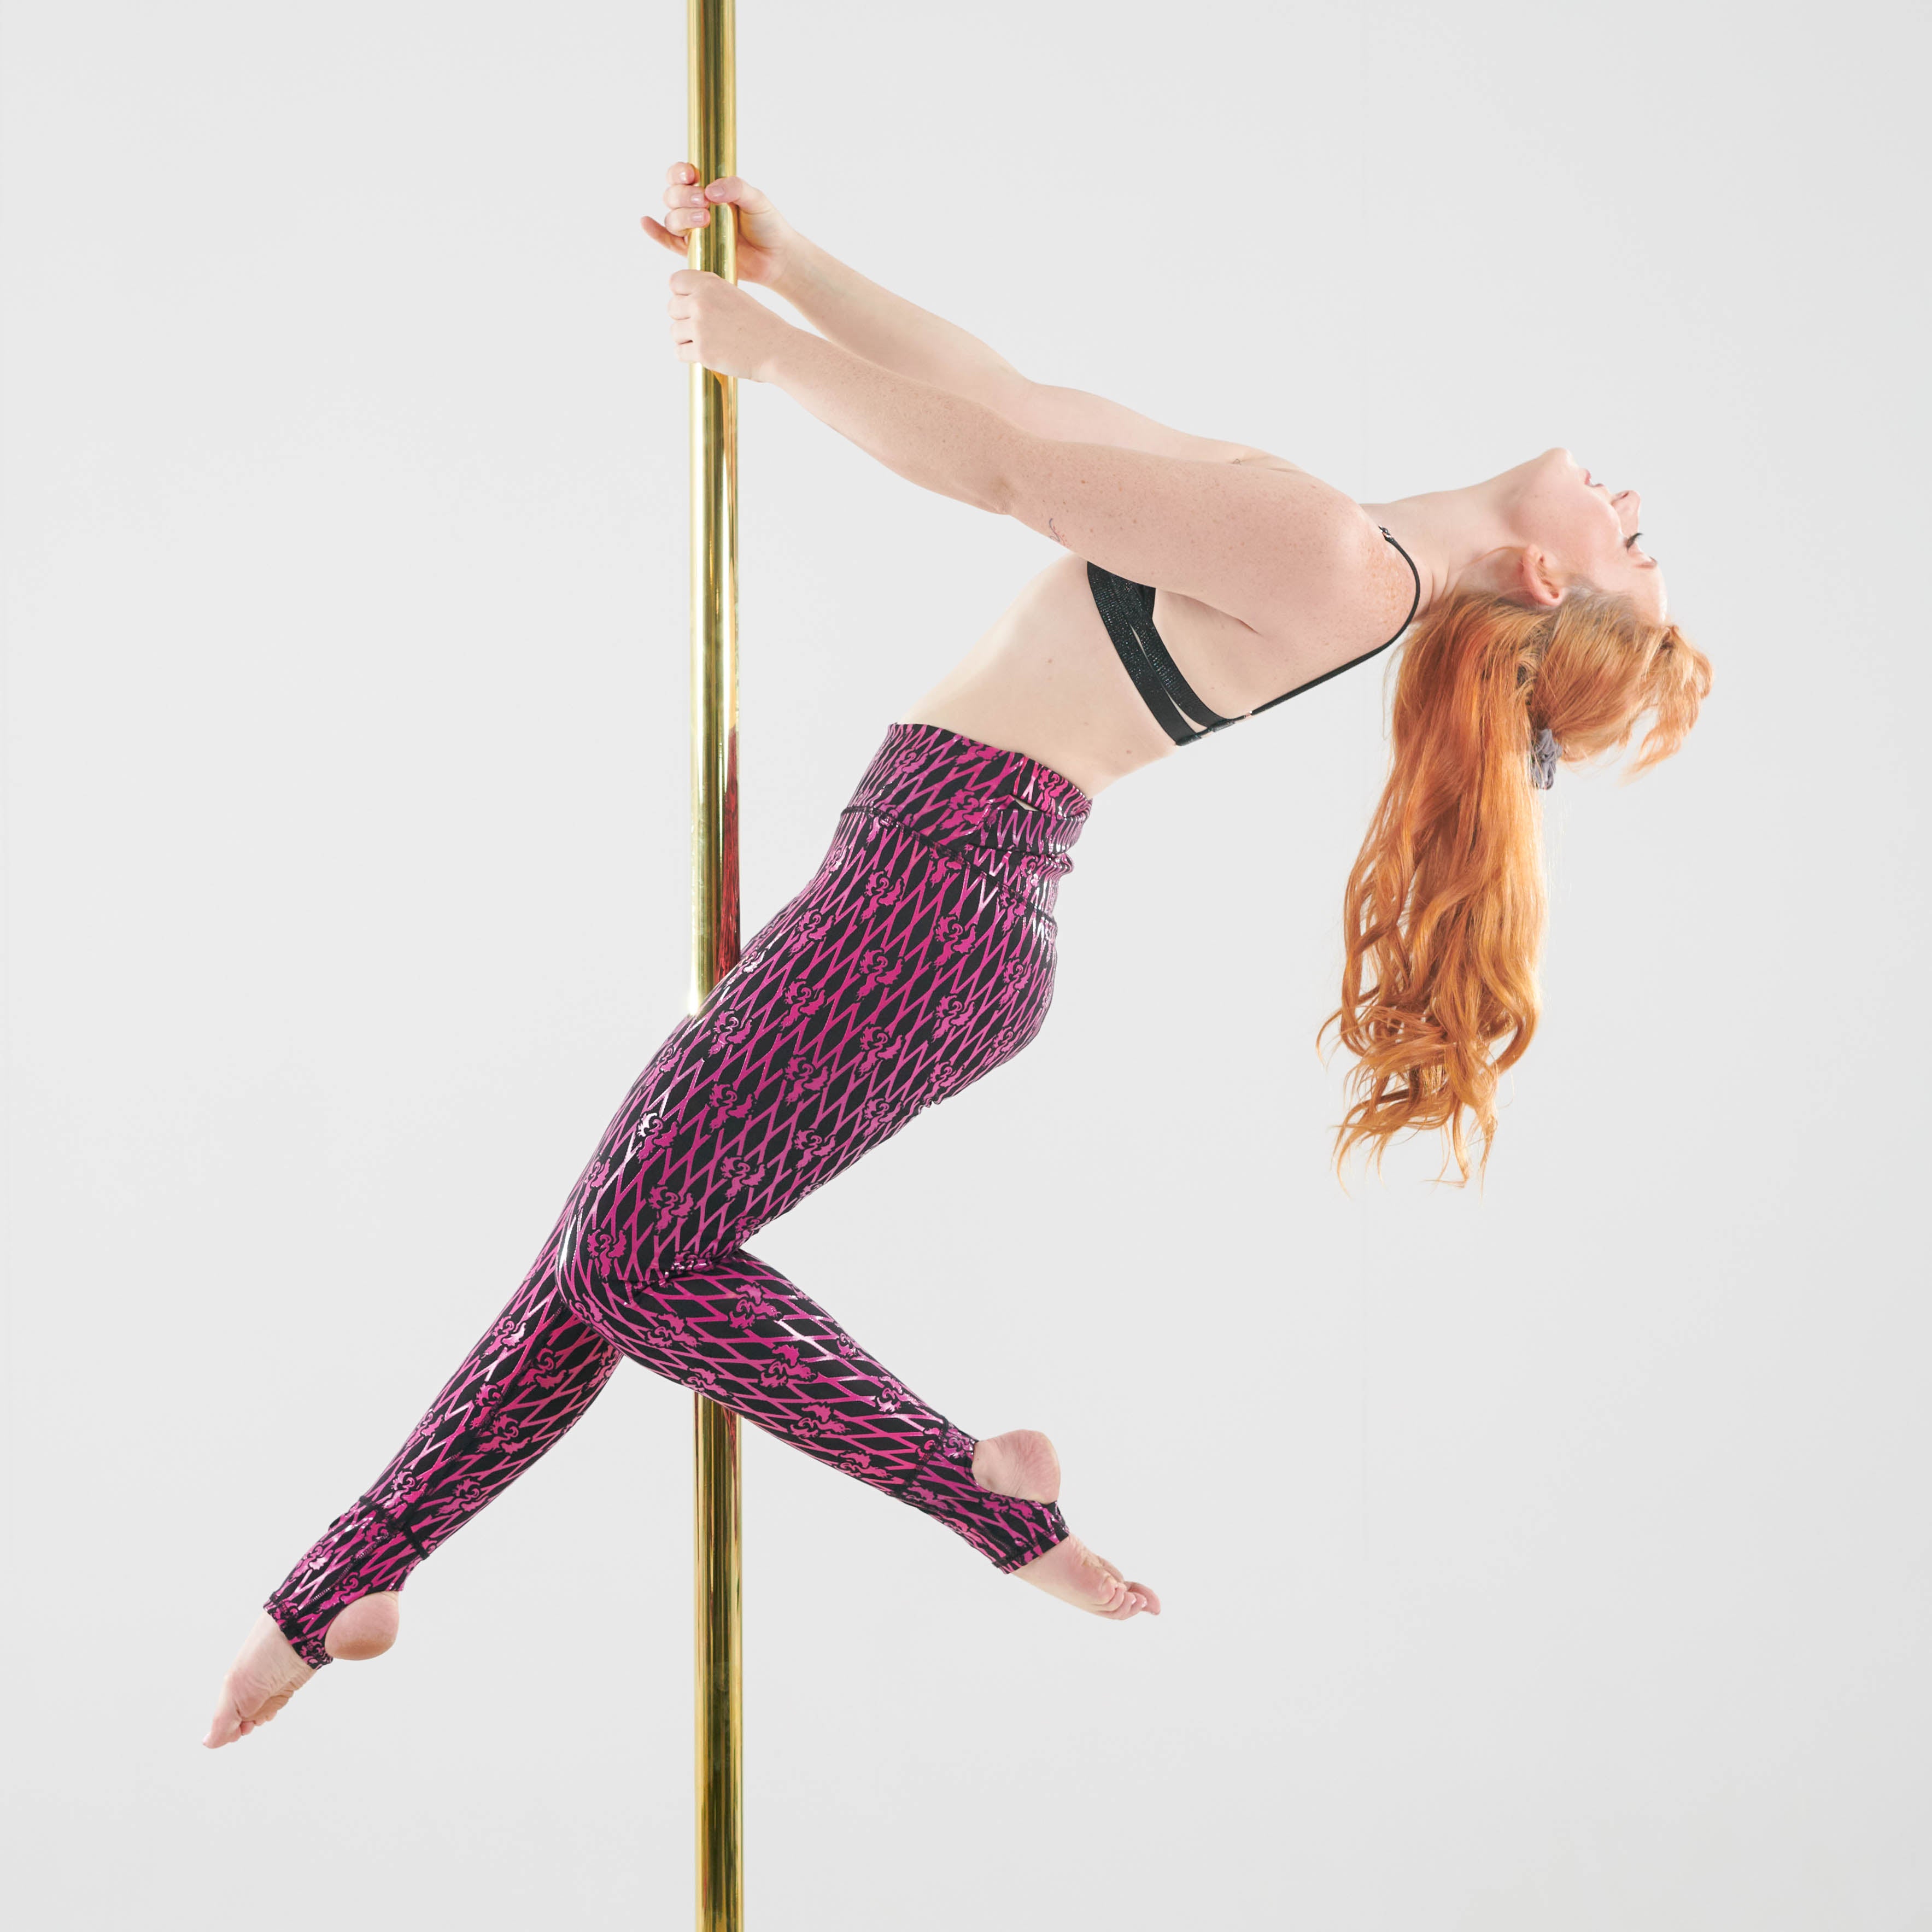 10 Ways to Get Better at Pole Dancing - Super Fly Honey Sticky Pole Wear